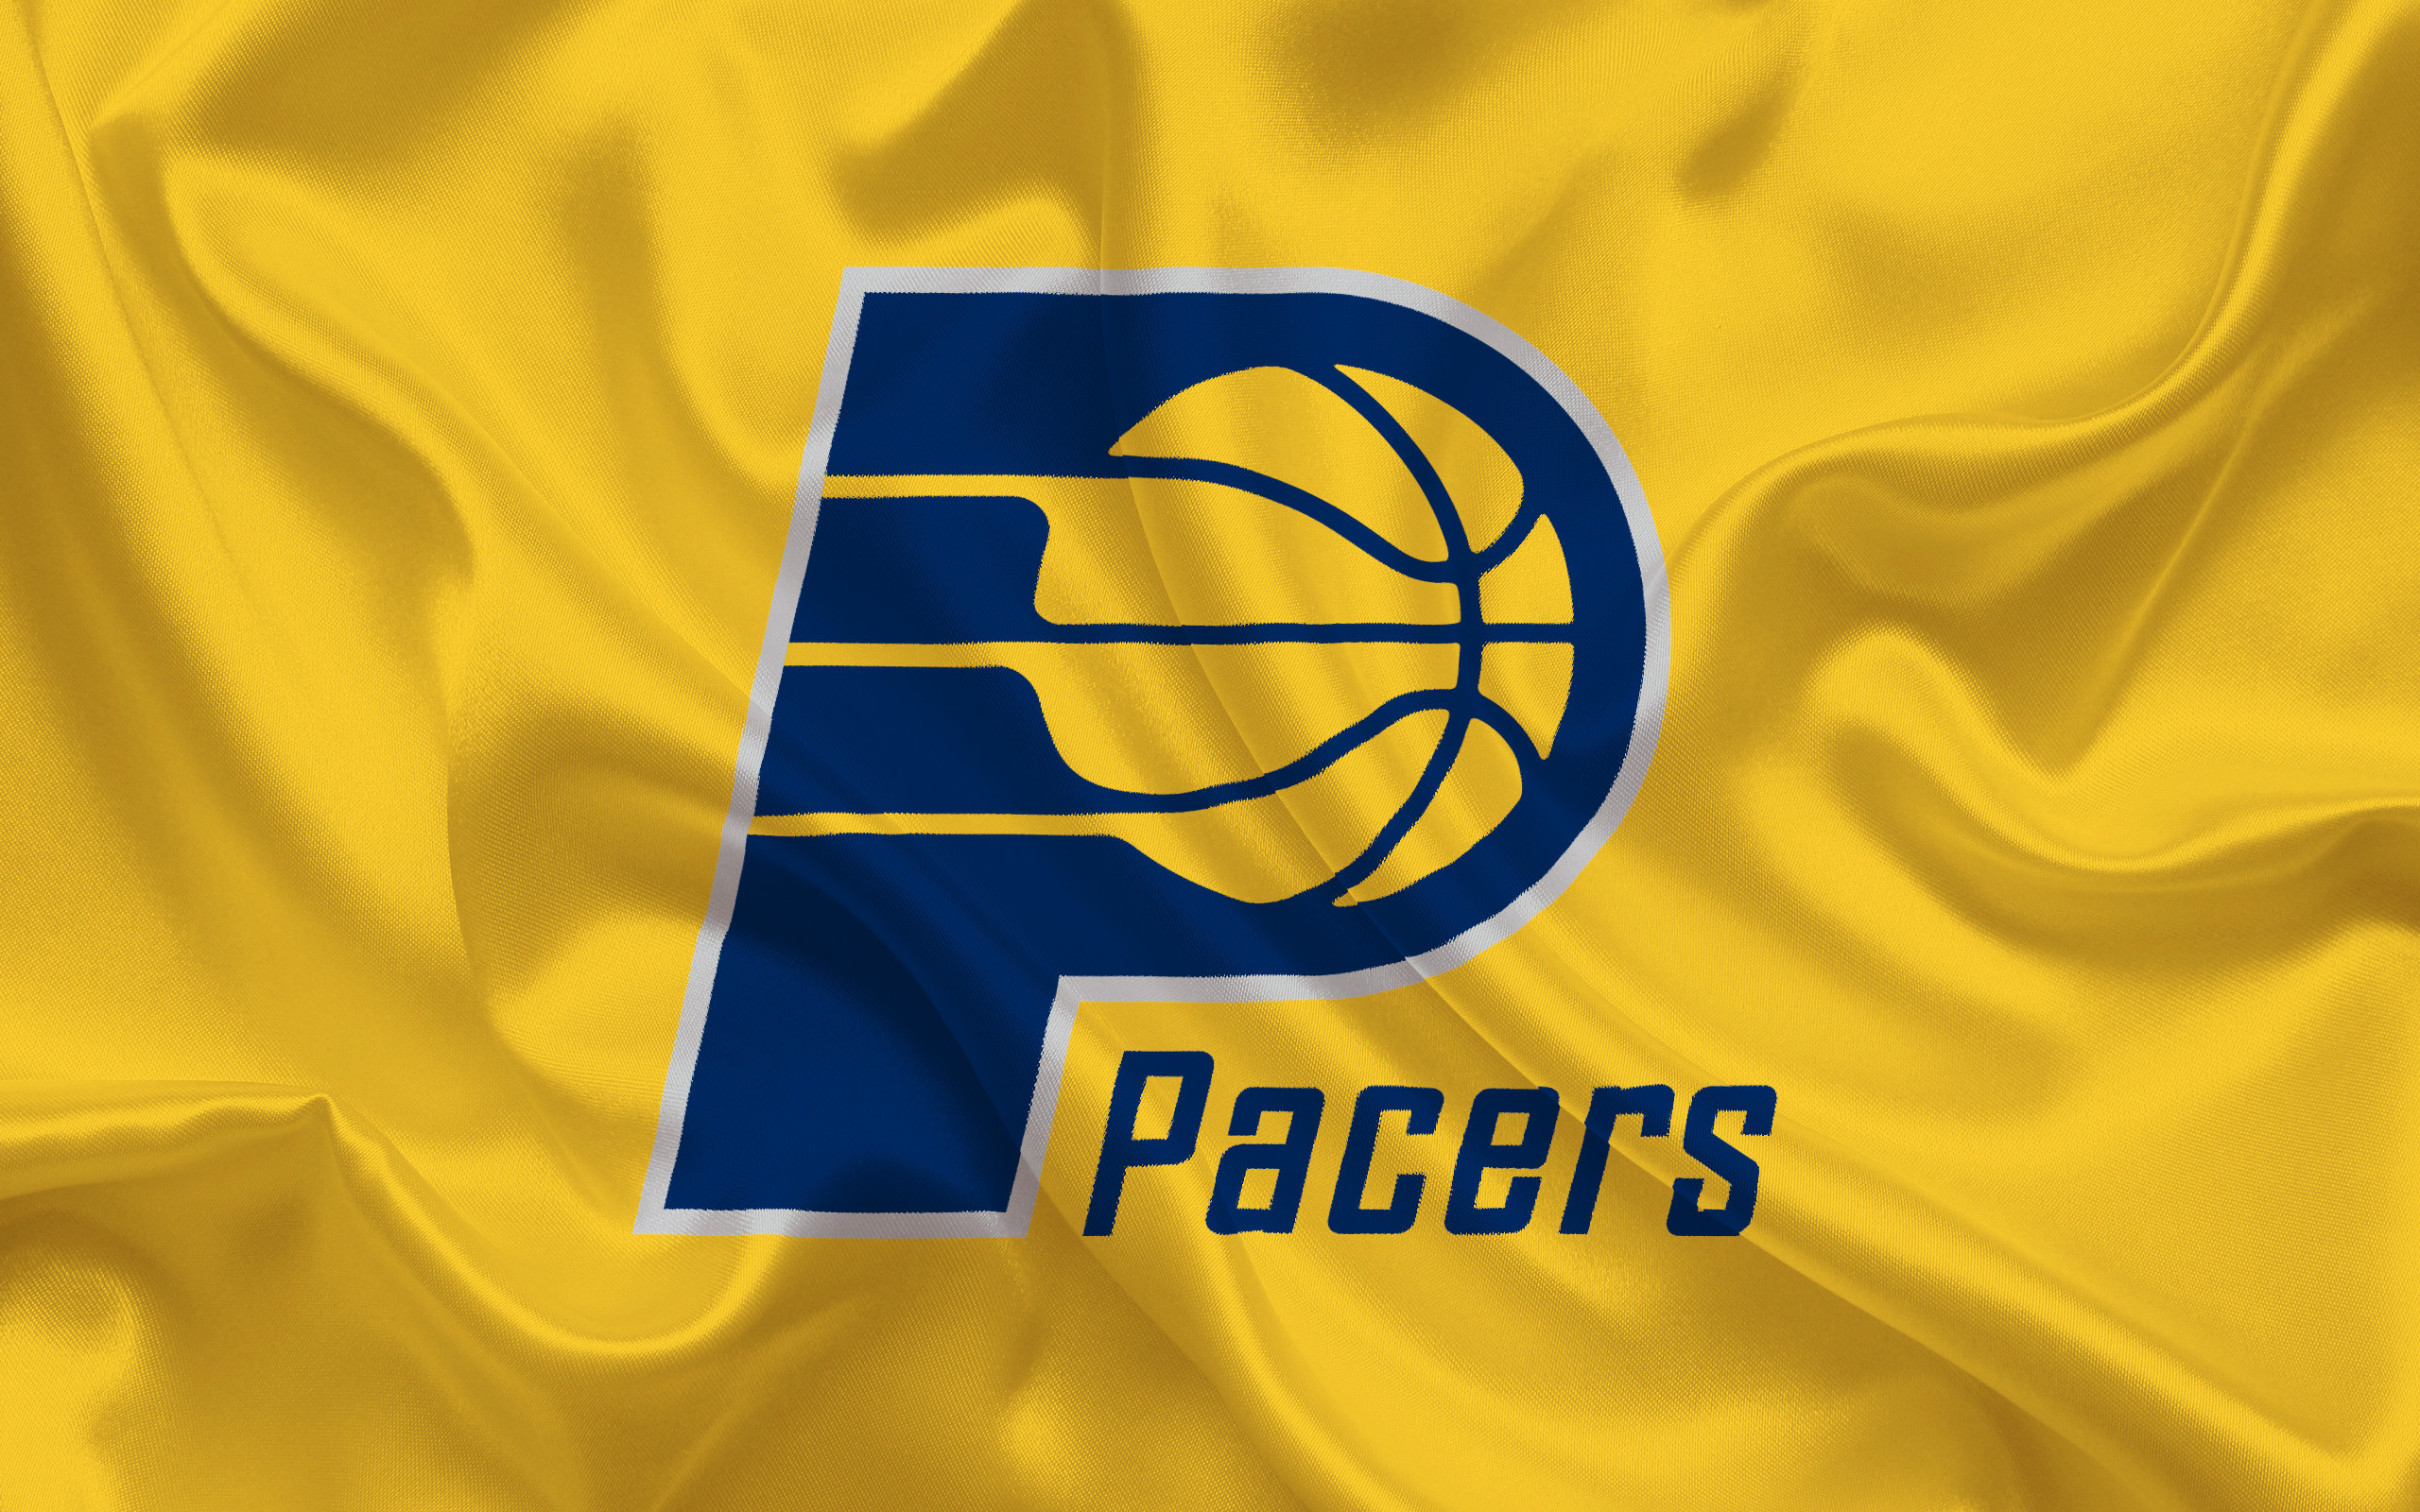 Indiana Pacers Wallpapers 69 Images